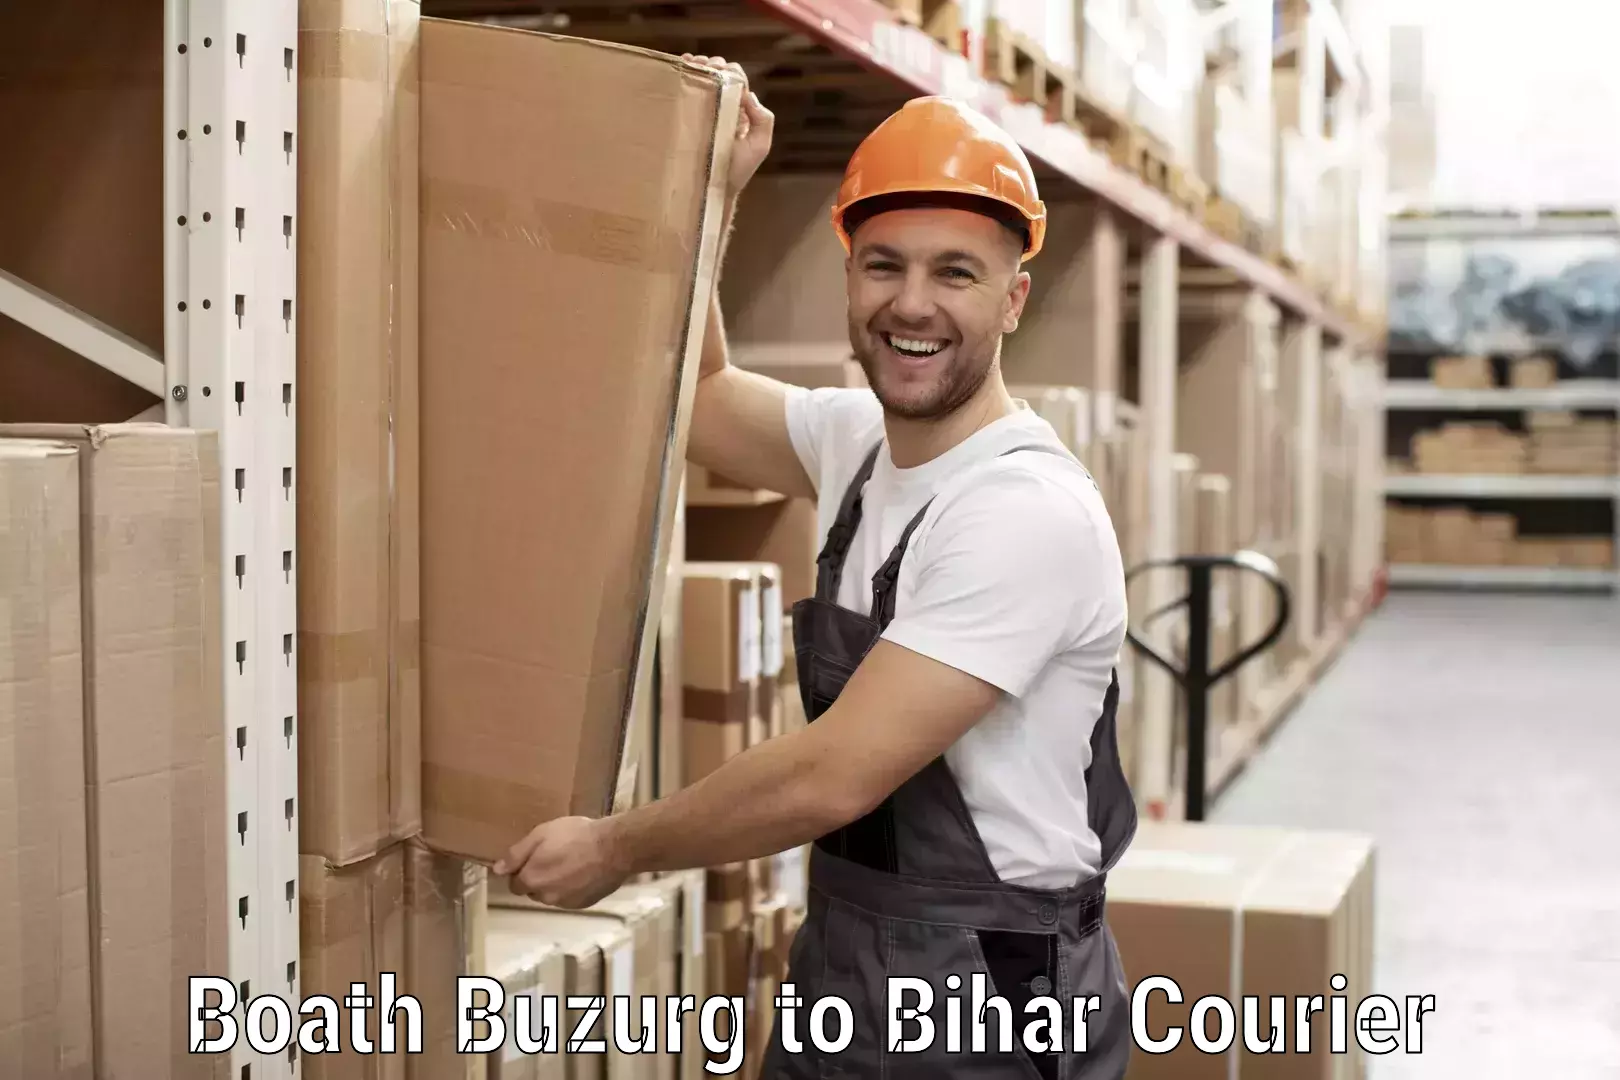 Quality courier services Boath Buzurg to Biraul